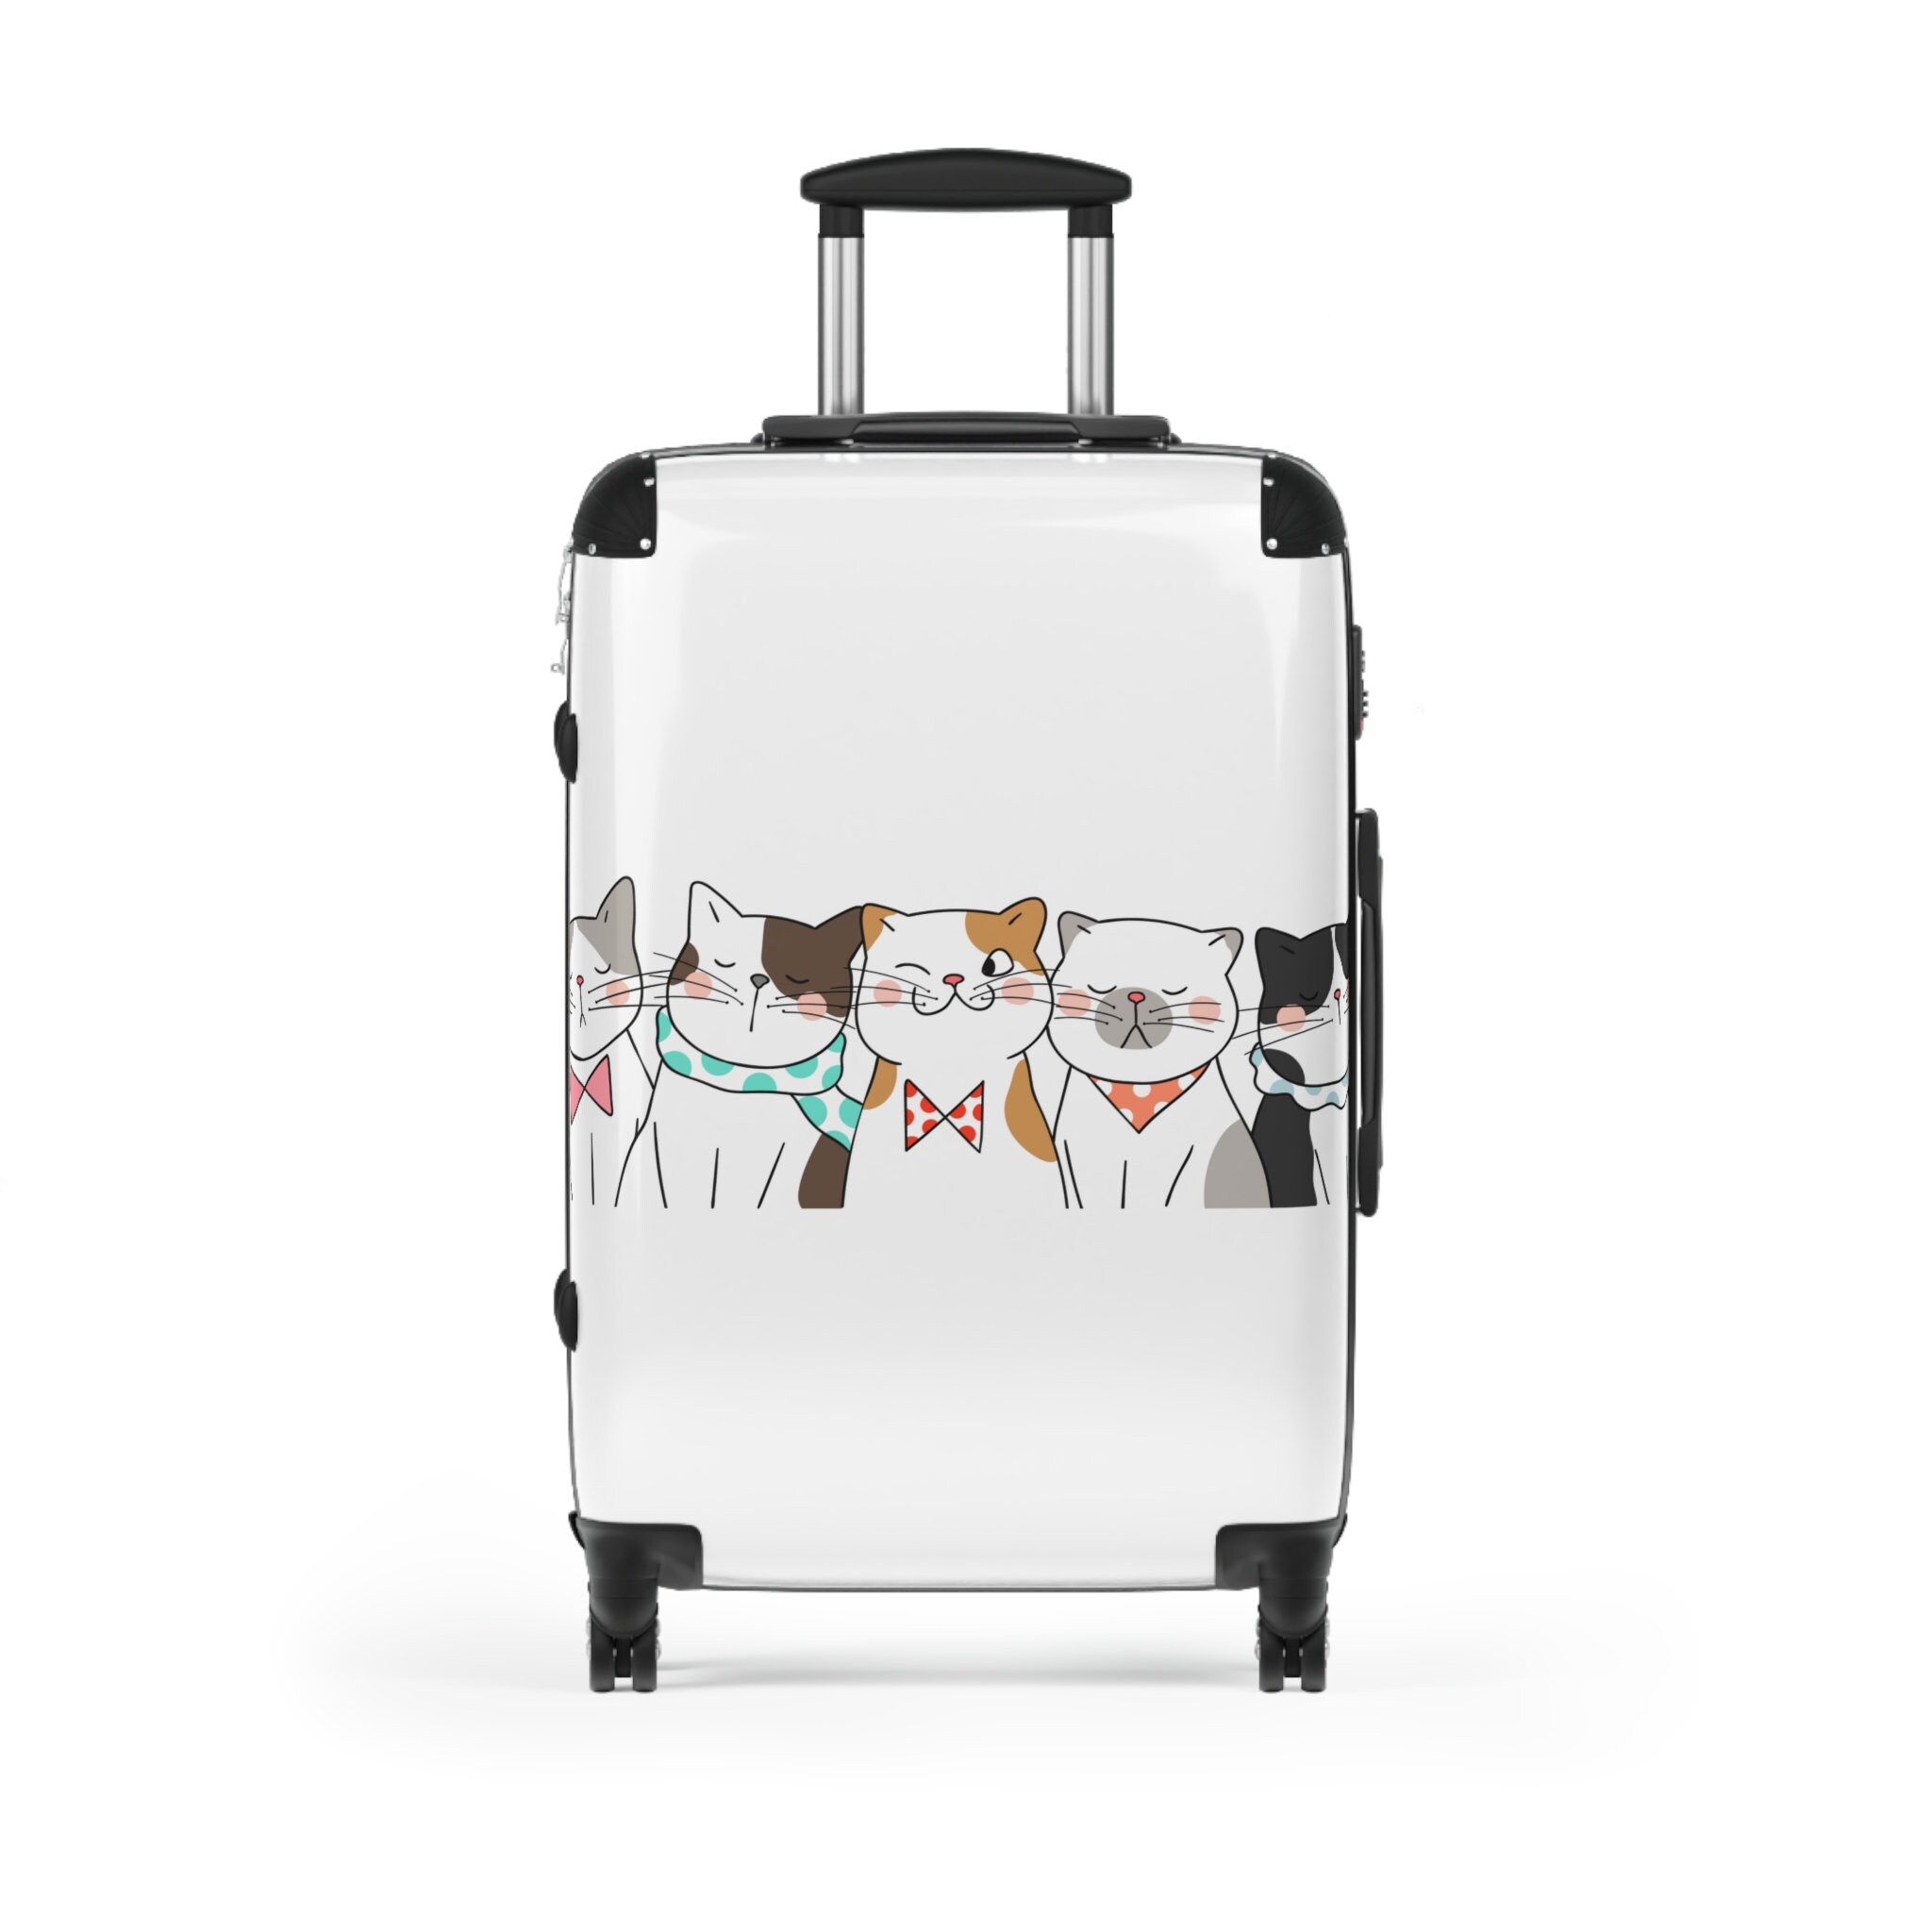 Cute Cat cats kitty kitten Luggage Suitcase Carry-On Carryon Bag Wheels 360 Swivel Handle